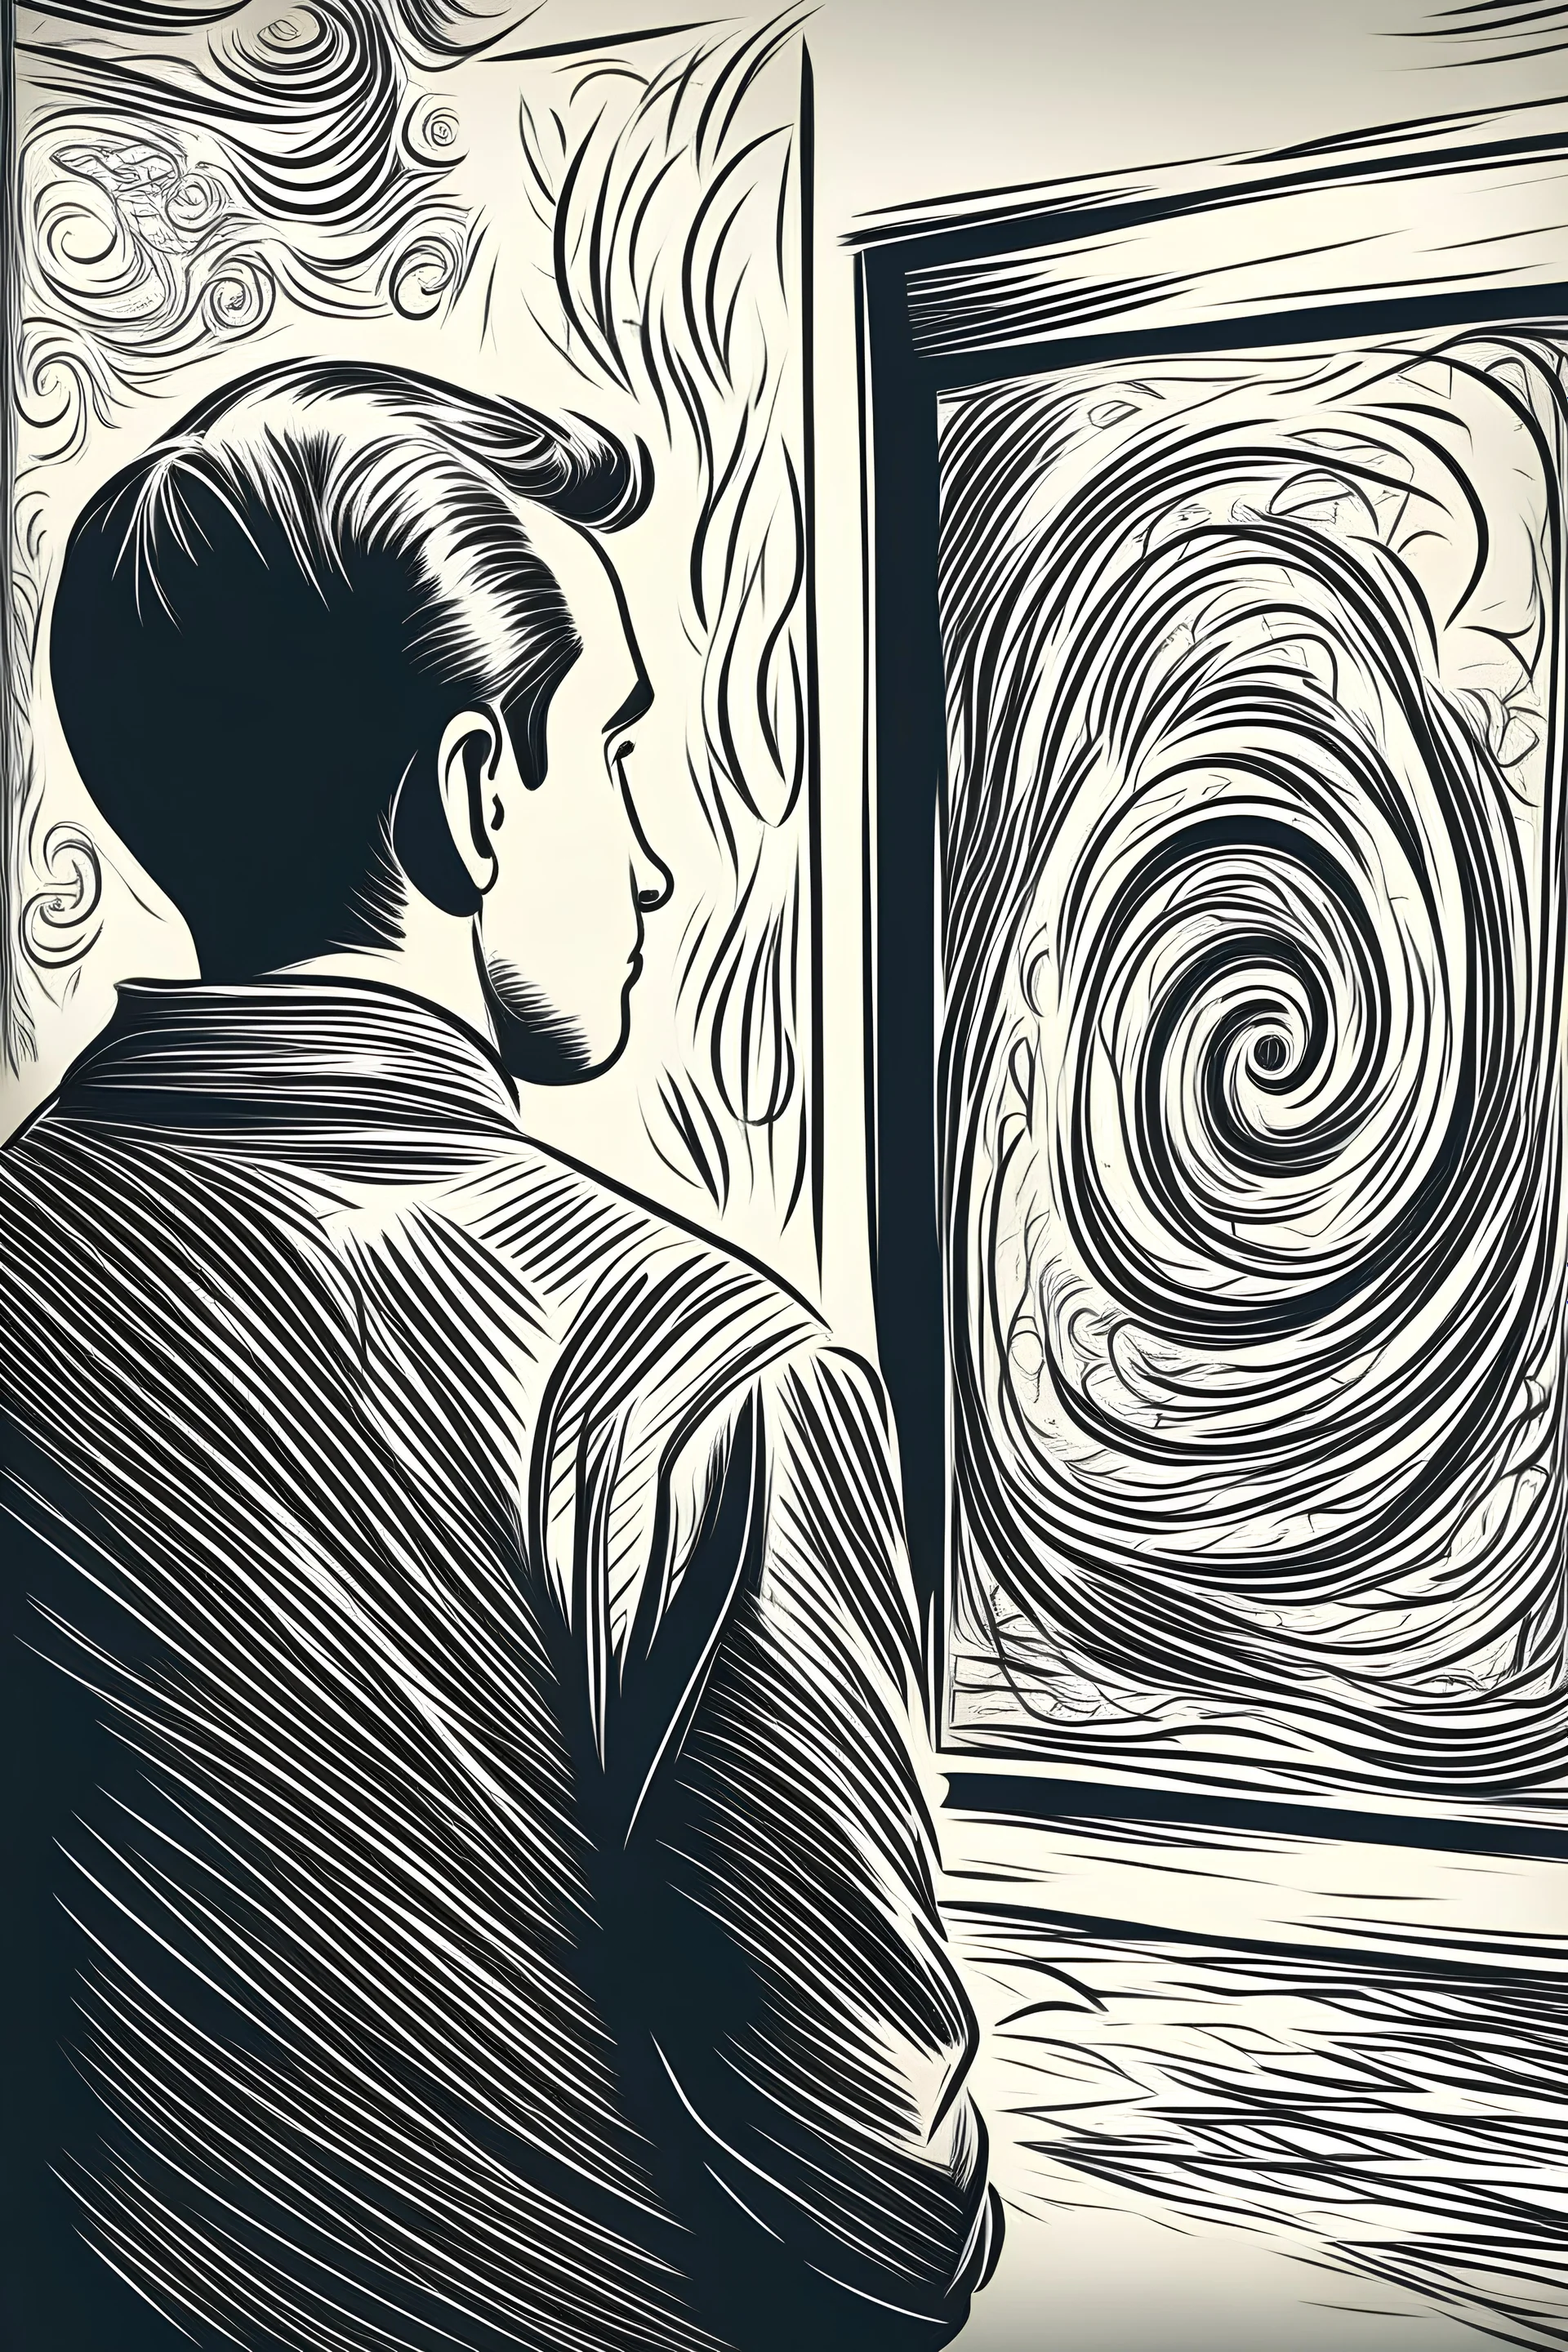 person watching a poster 60s art drawing style